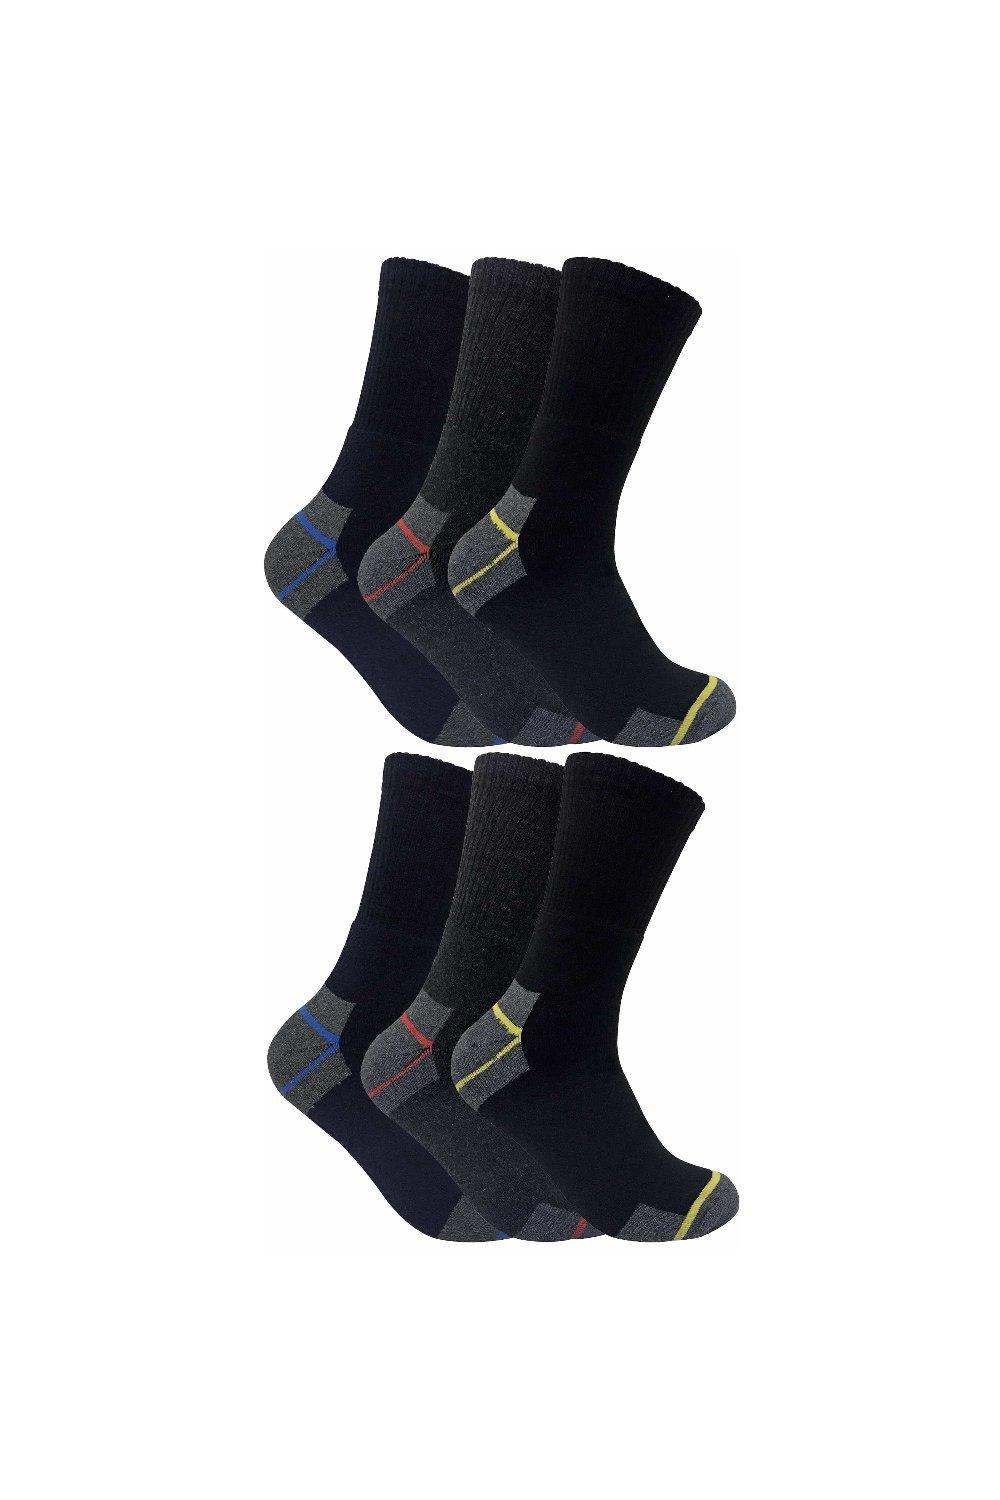 6 Pairs Heavy Duty Cushioned Cotton Work Socks for Steel Toe Boots